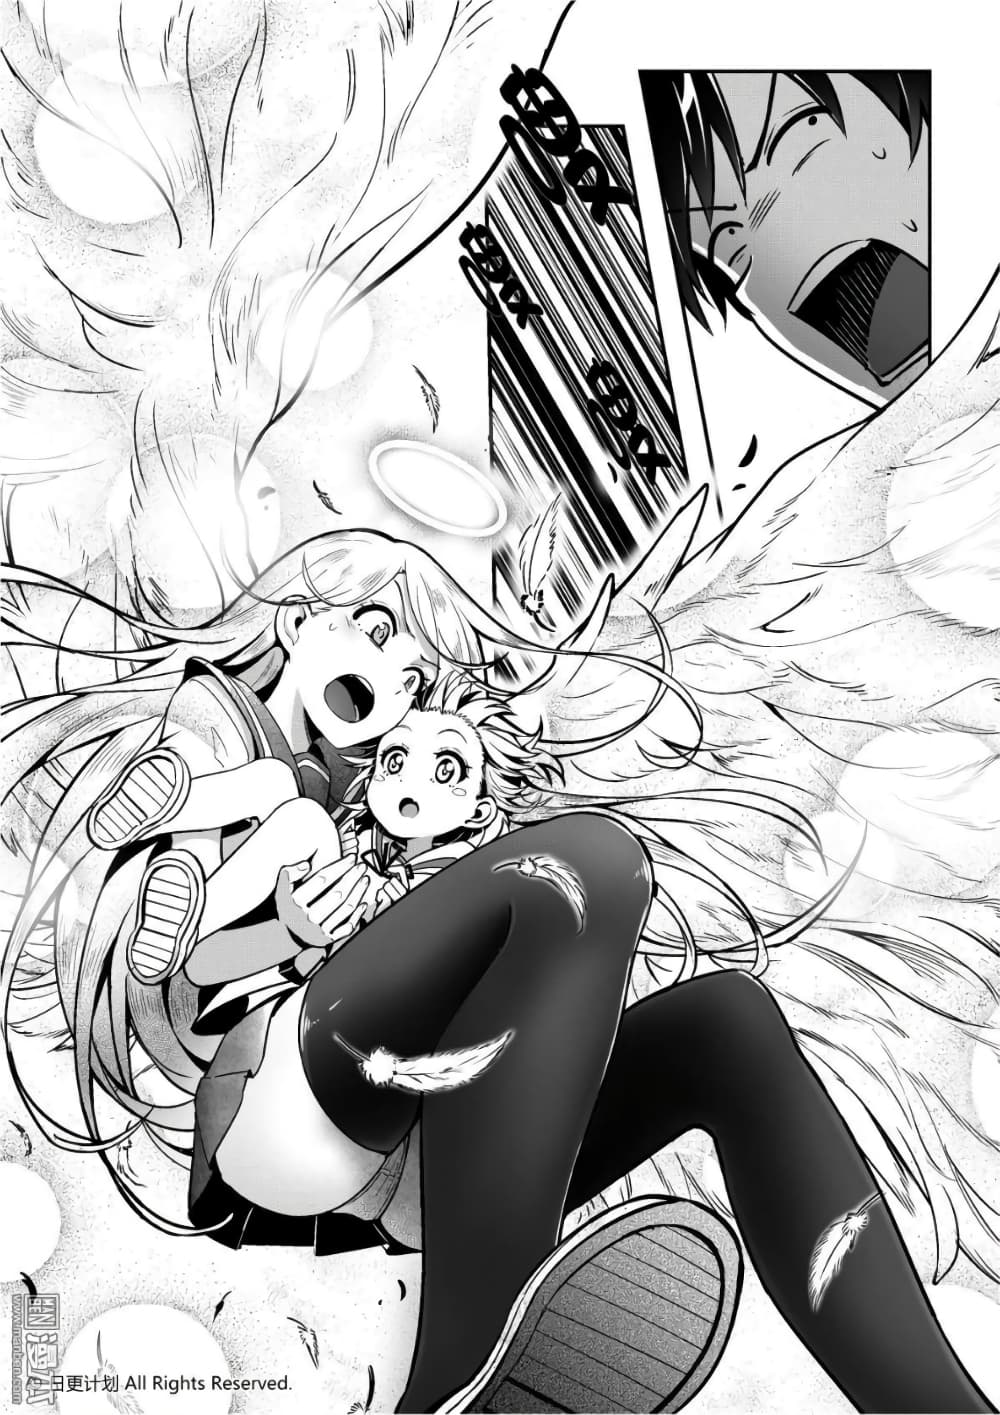 Angel X Demon is destined not to get along well 0-0